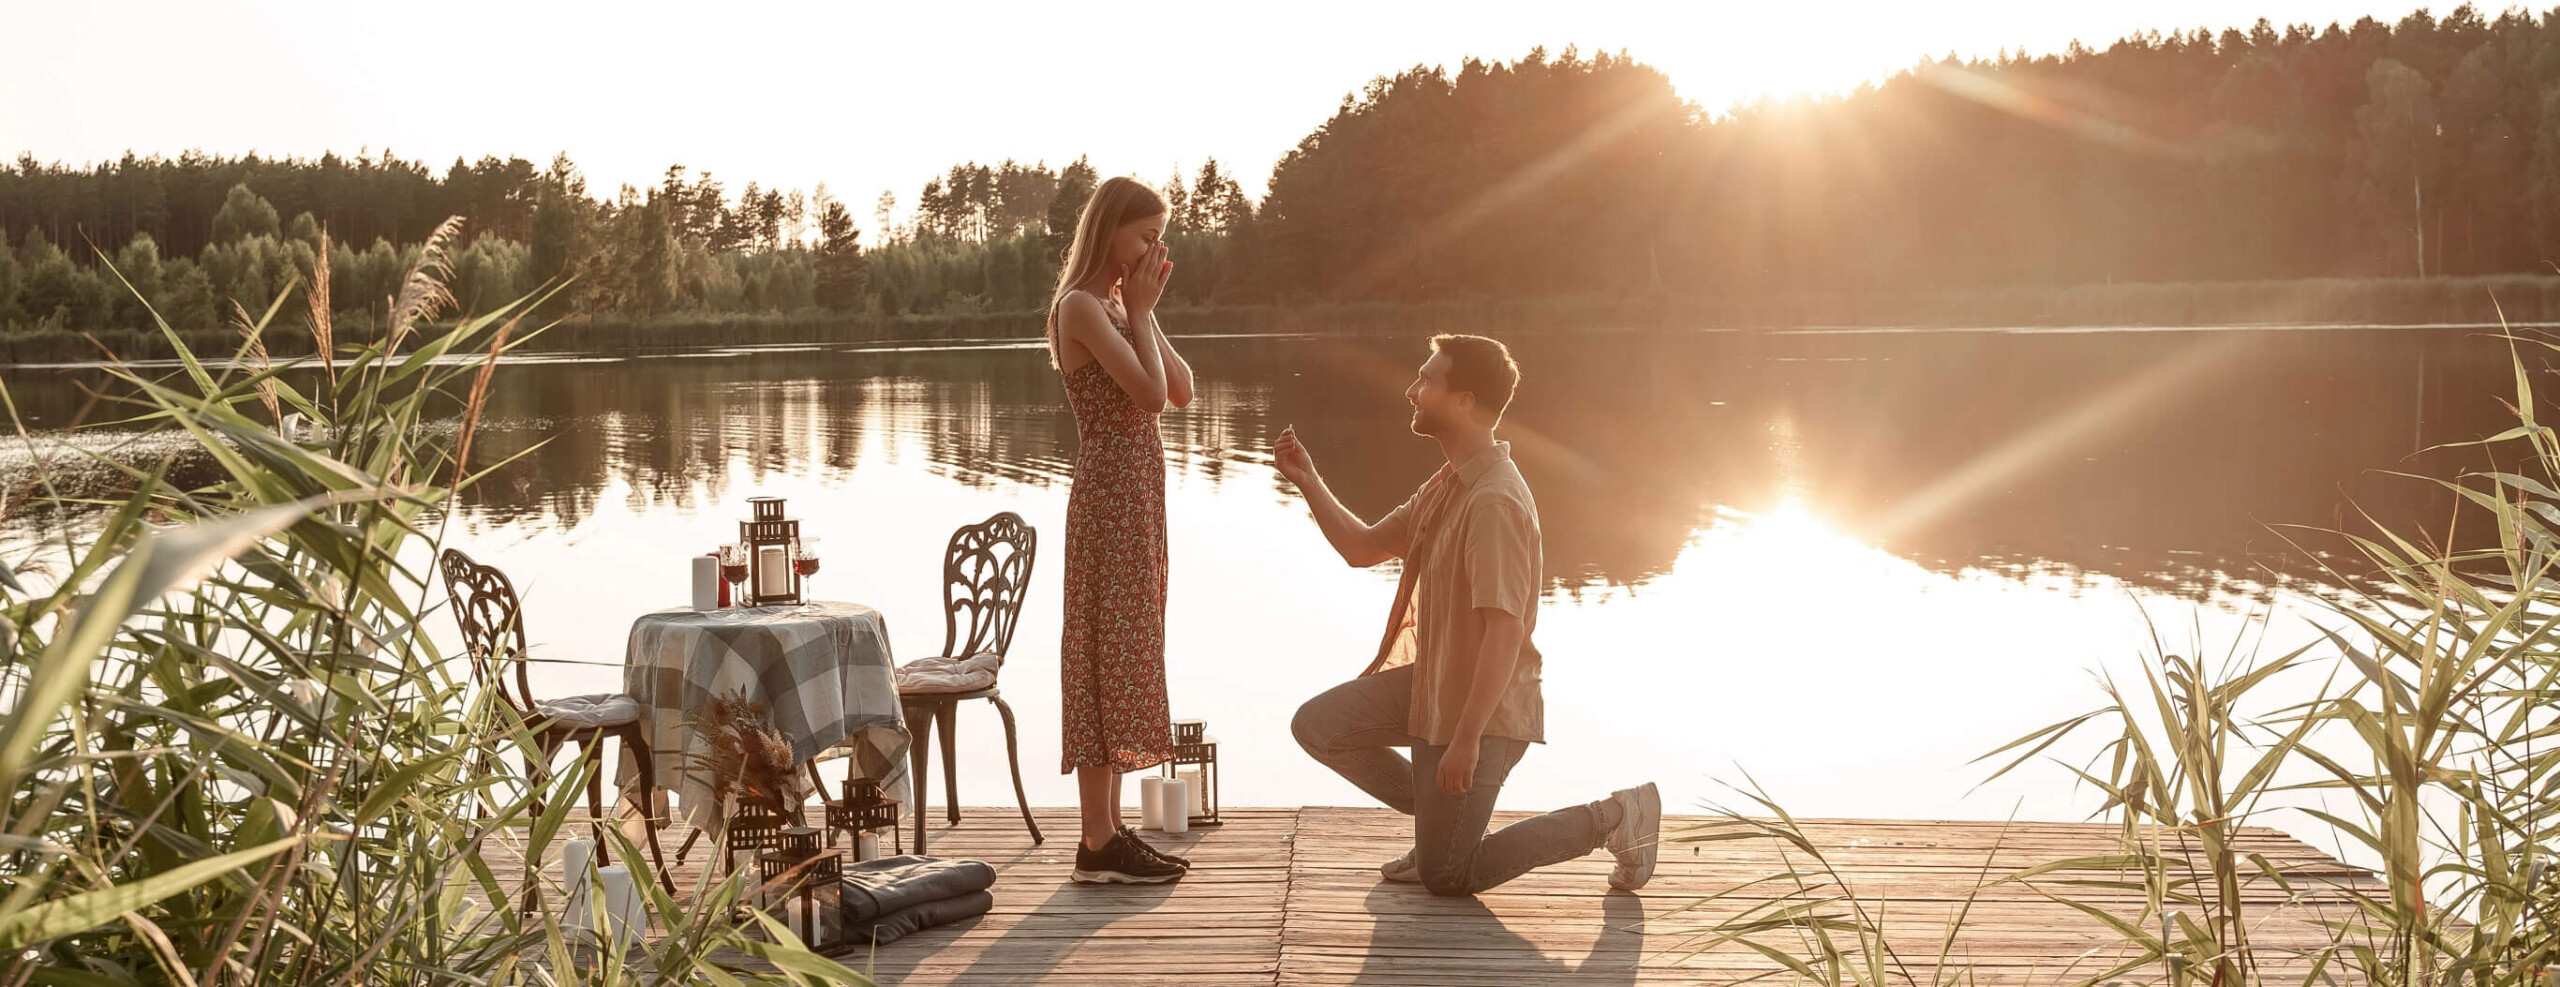 Five Expert Tips For Your Perfect Proposal Photoshoot 1 Scaled 1